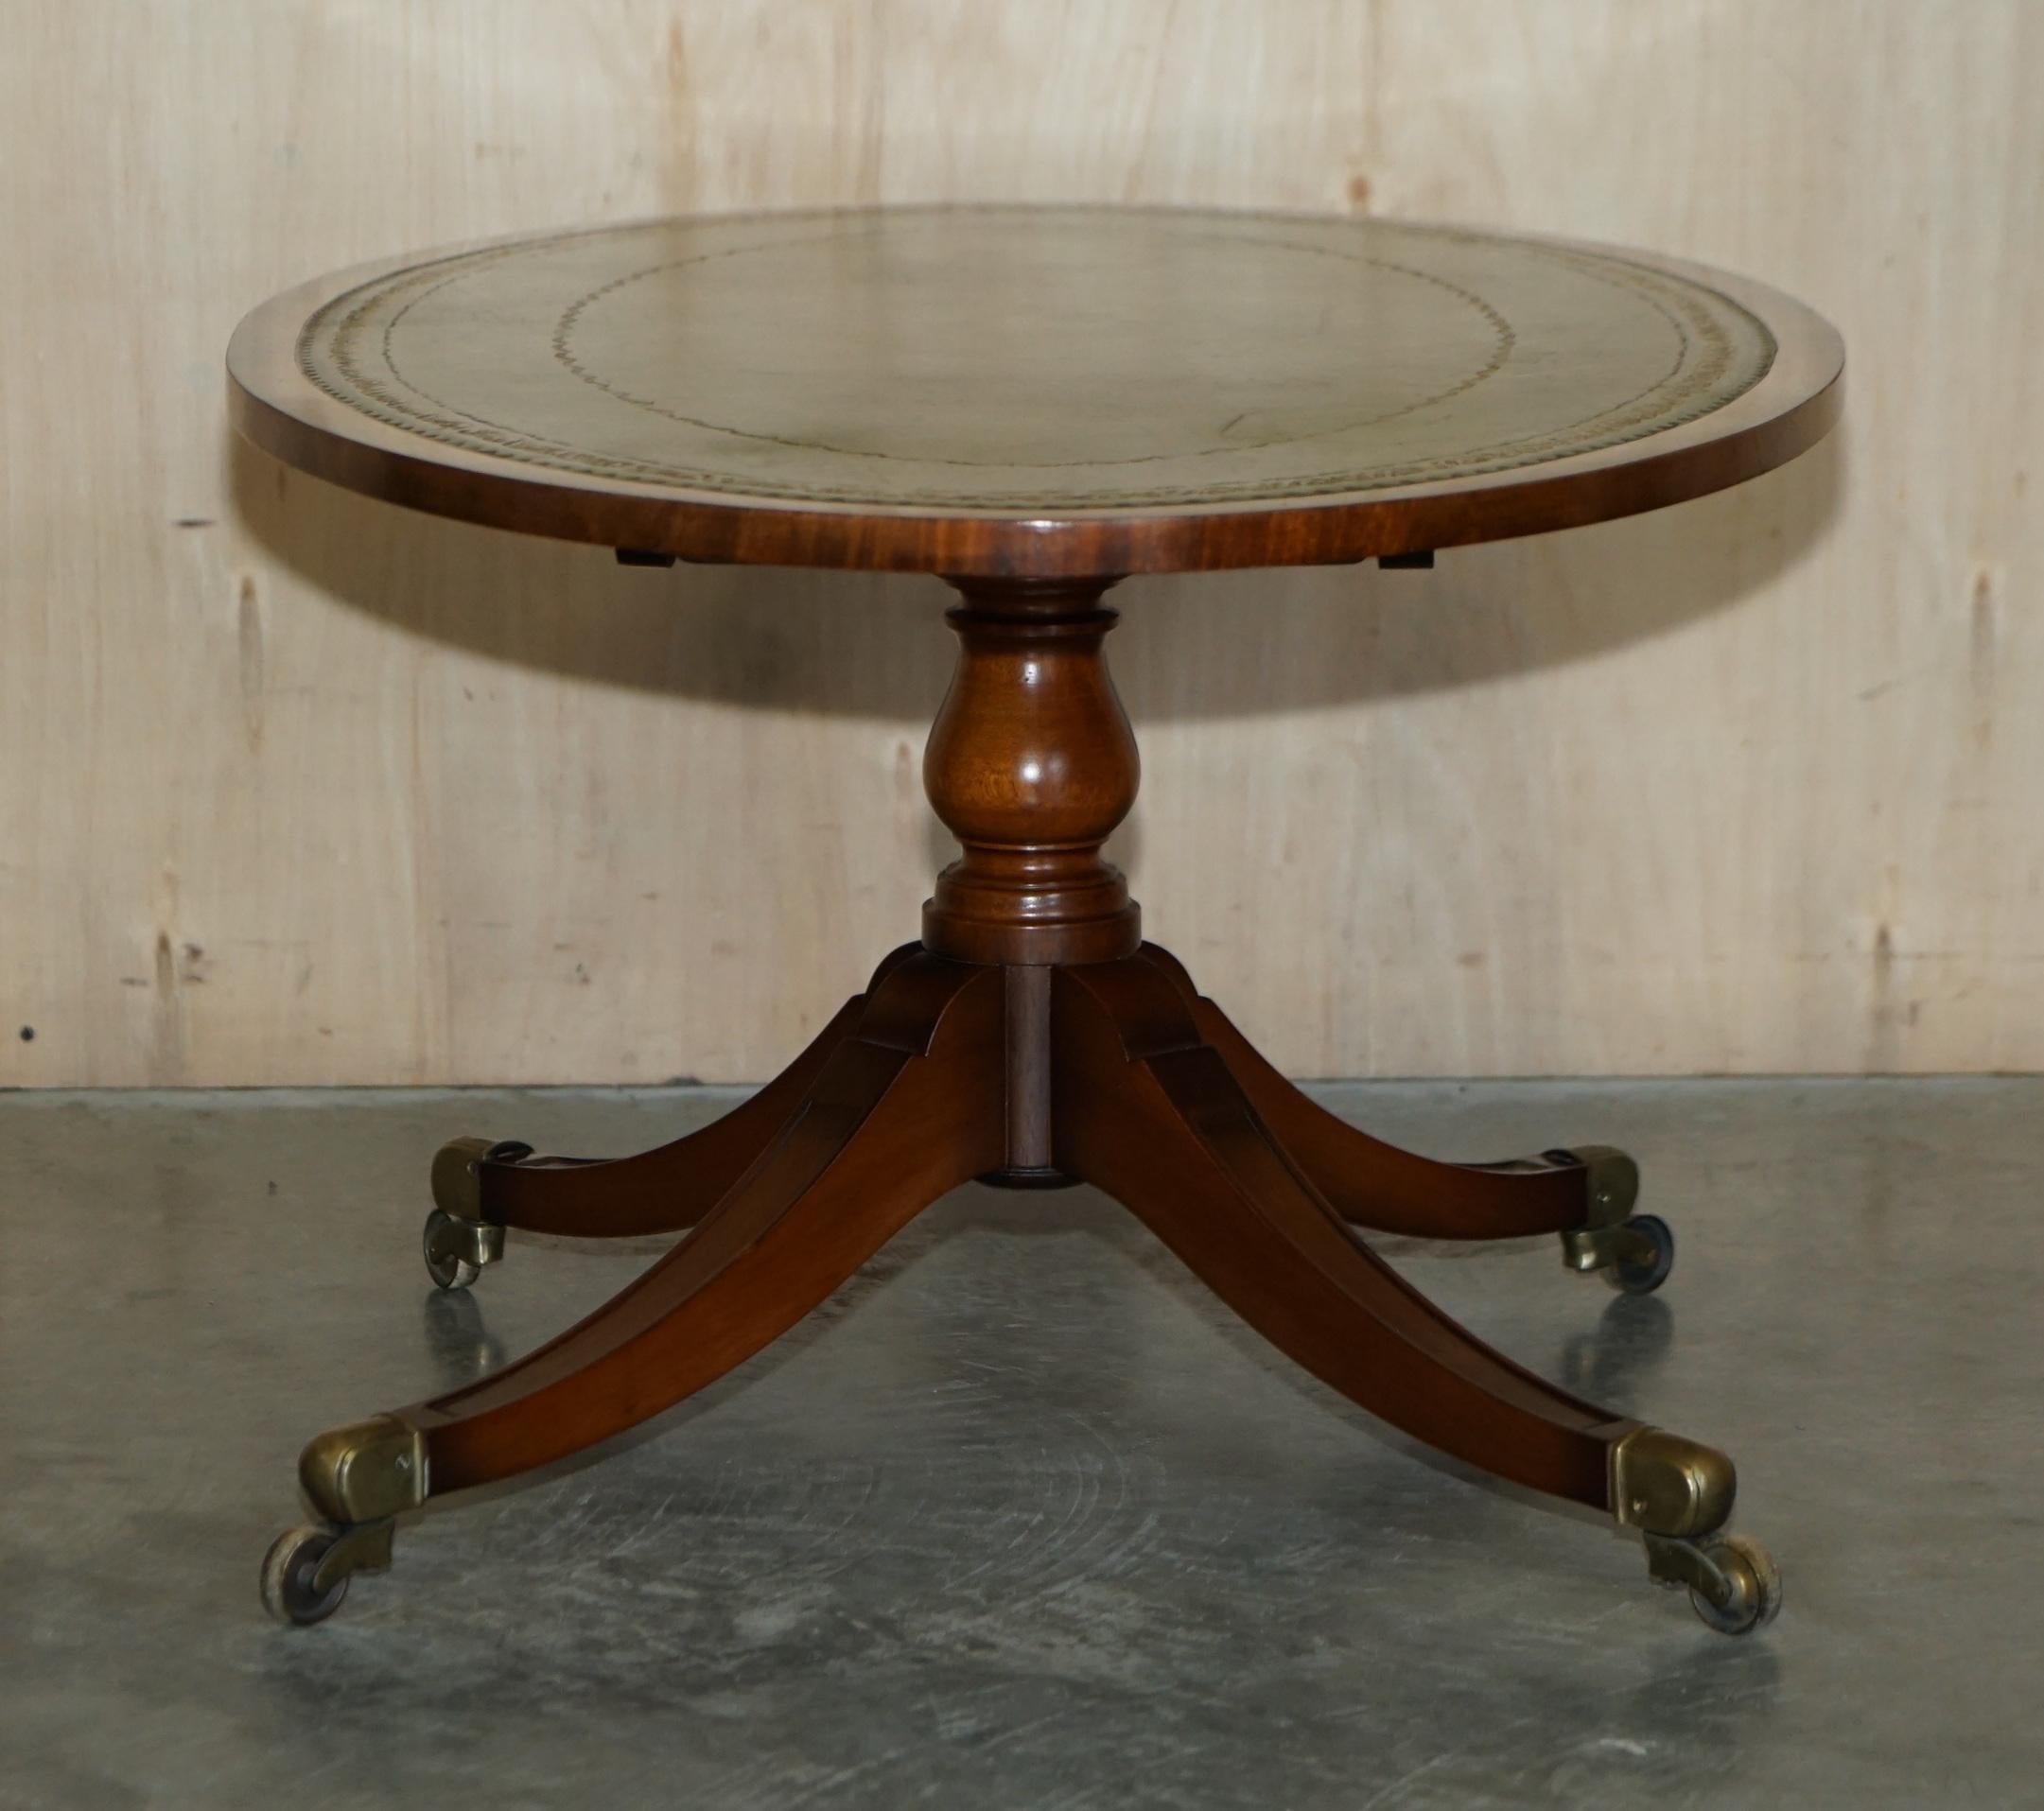 Stunning circa 1900 English Walnut Green Leather Brass Castor Oval Coffee Table For Sale 8